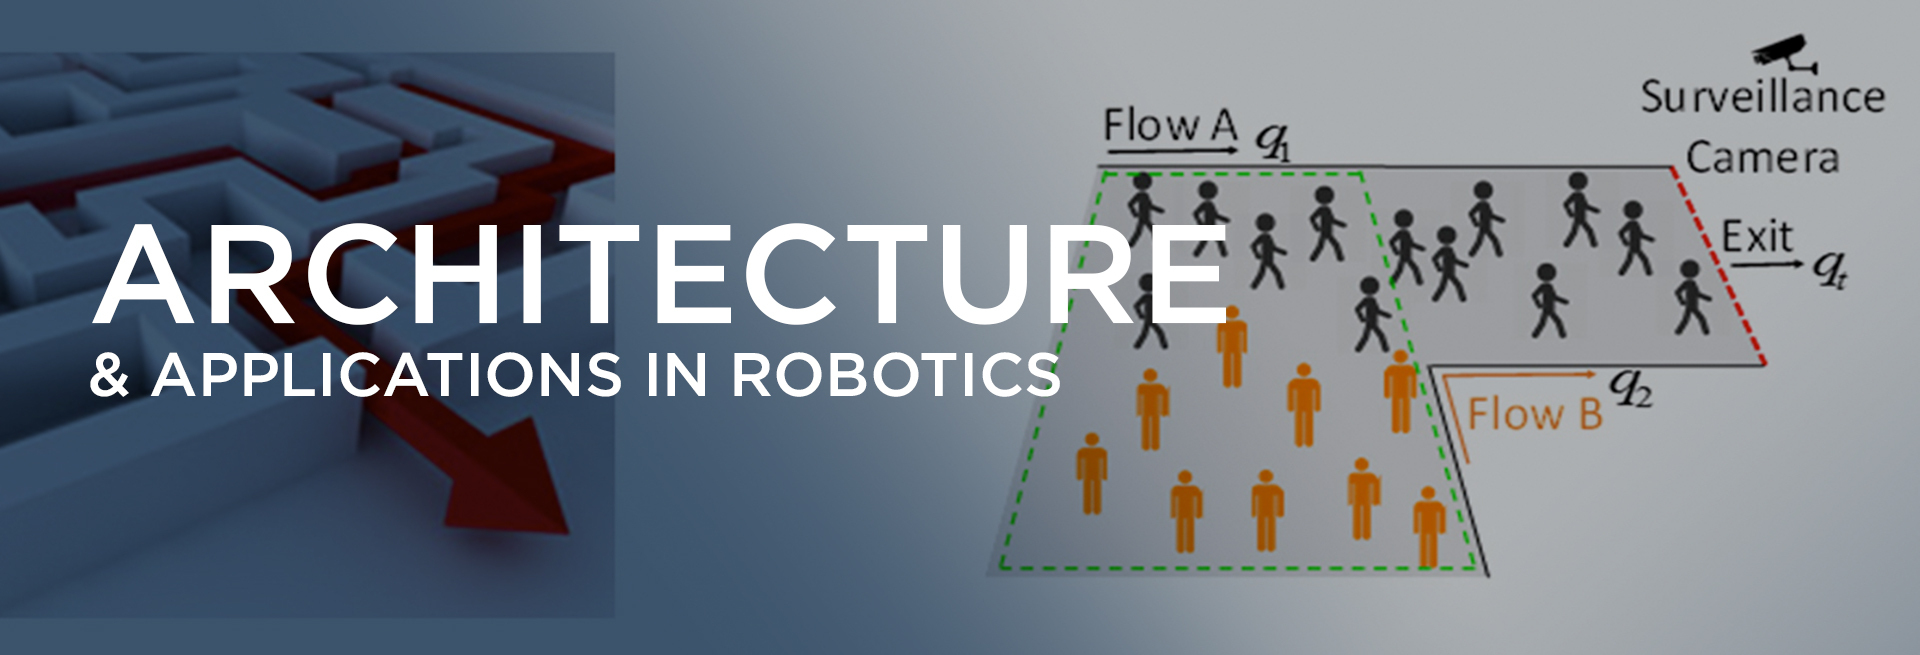 Architecture and applications in robotics